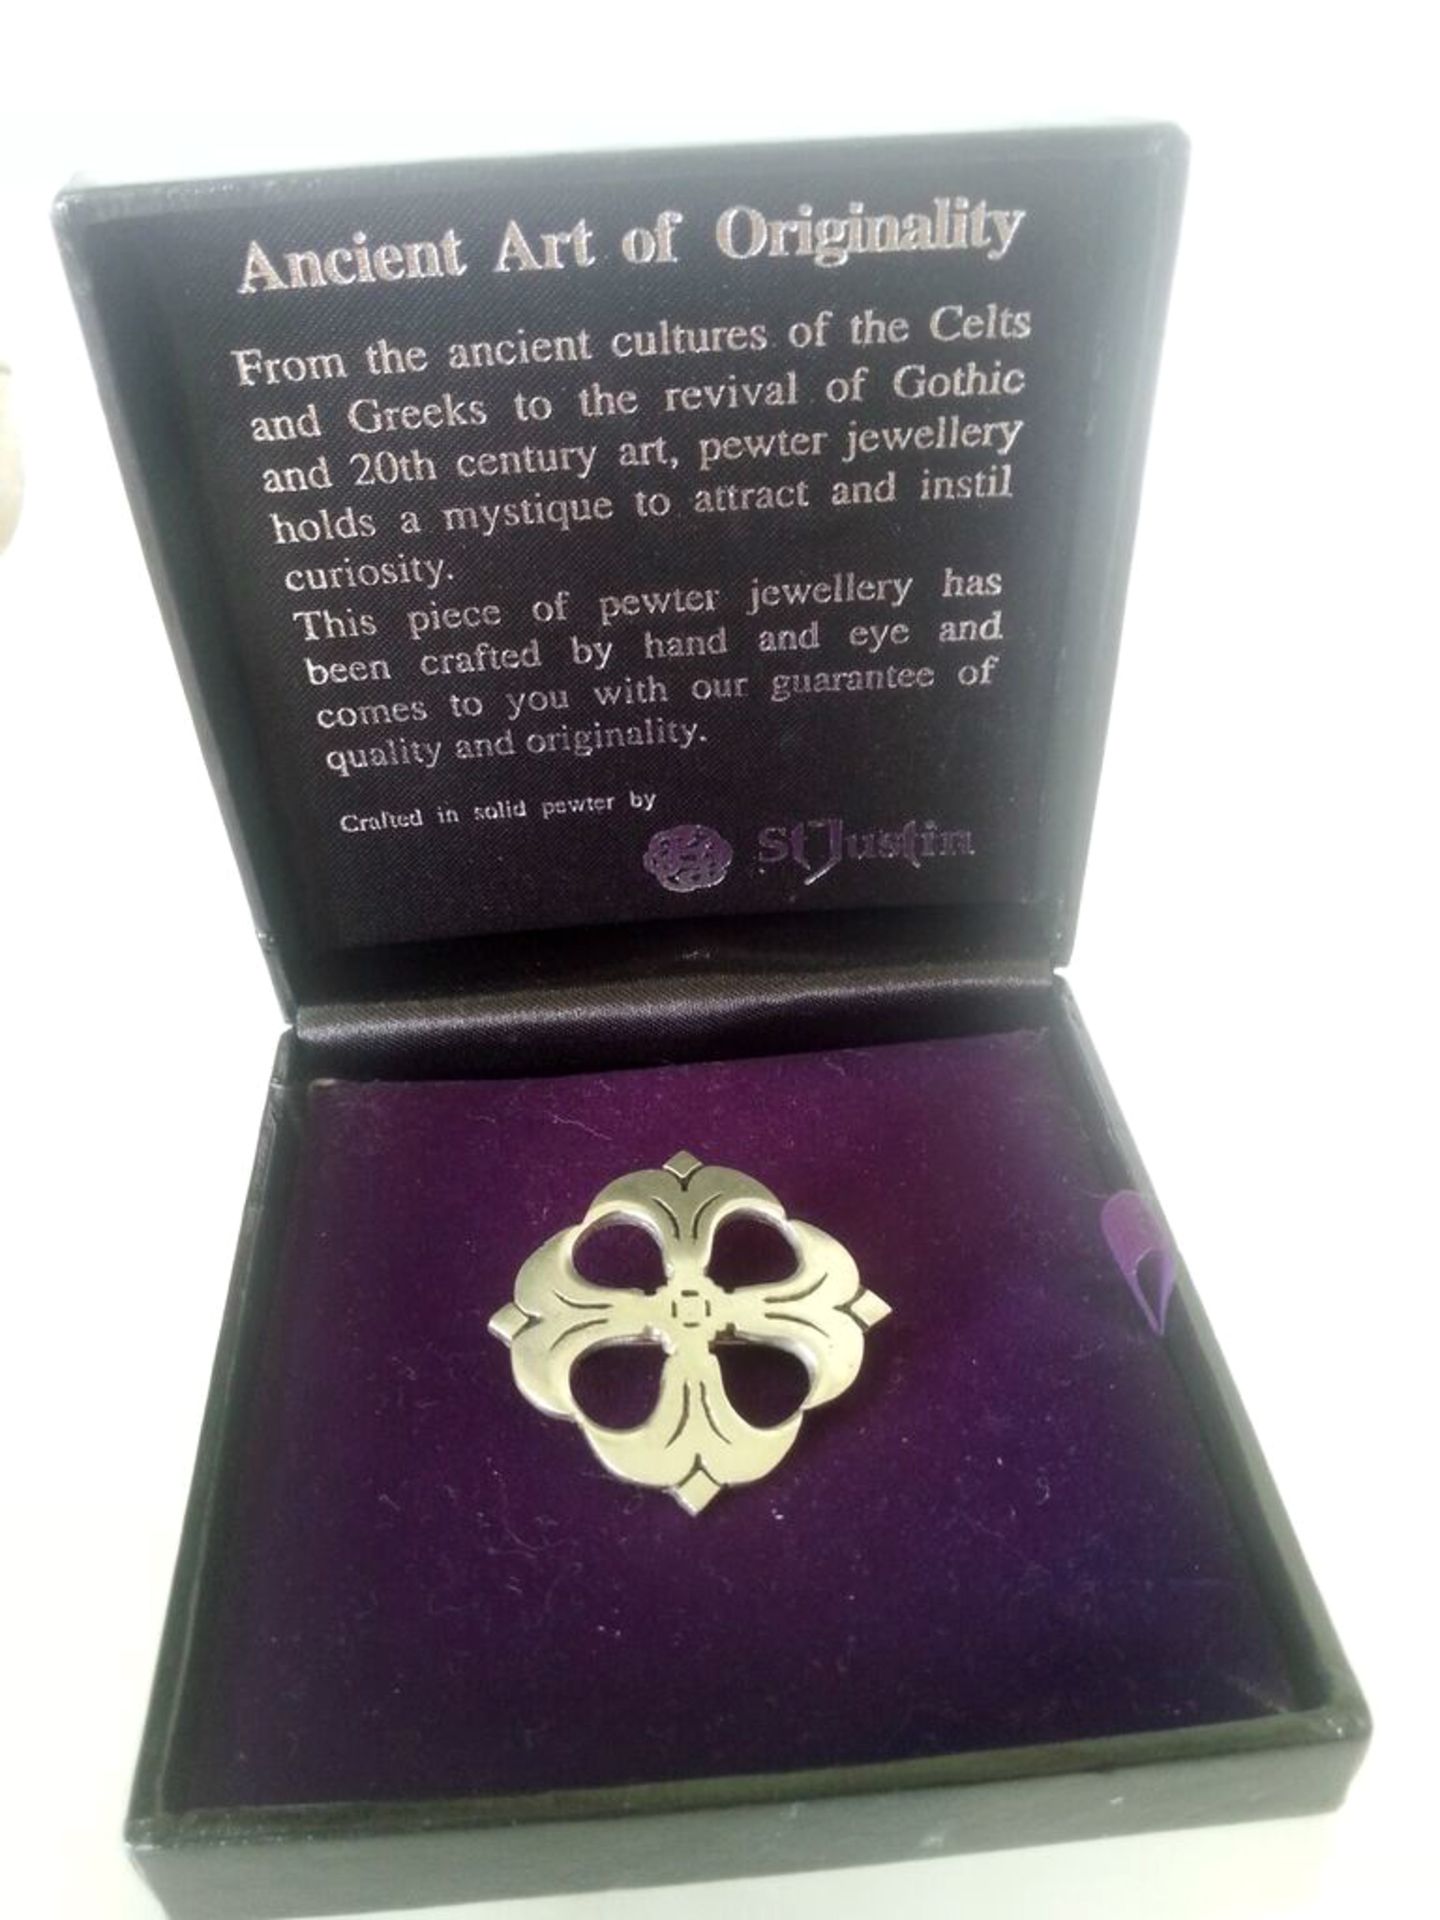 PEWTER CELTIC S JUSTIN BROOCH IN ORIGNAL BOX. Low cost delivery available on all items. This is a